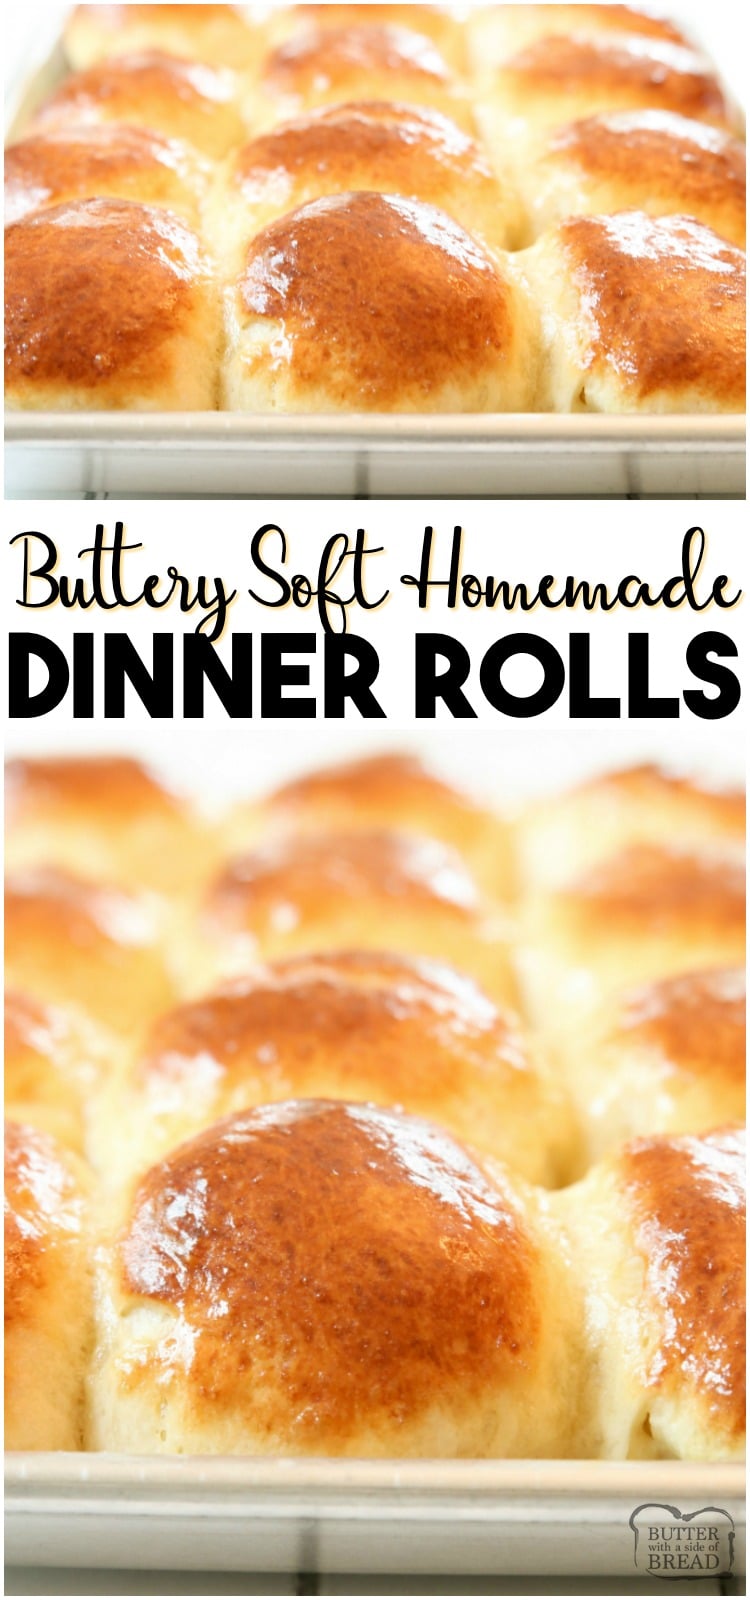 Easy Dinner Roll recipe perfect for procrastinators! Done in just over an hour, these buttery soft dinner rolls are the perfect addition to dinner. #rolls #dinner #bread #baking #homemade #yeast #recipe from BUTTER WITH A SIDE OF BREAD